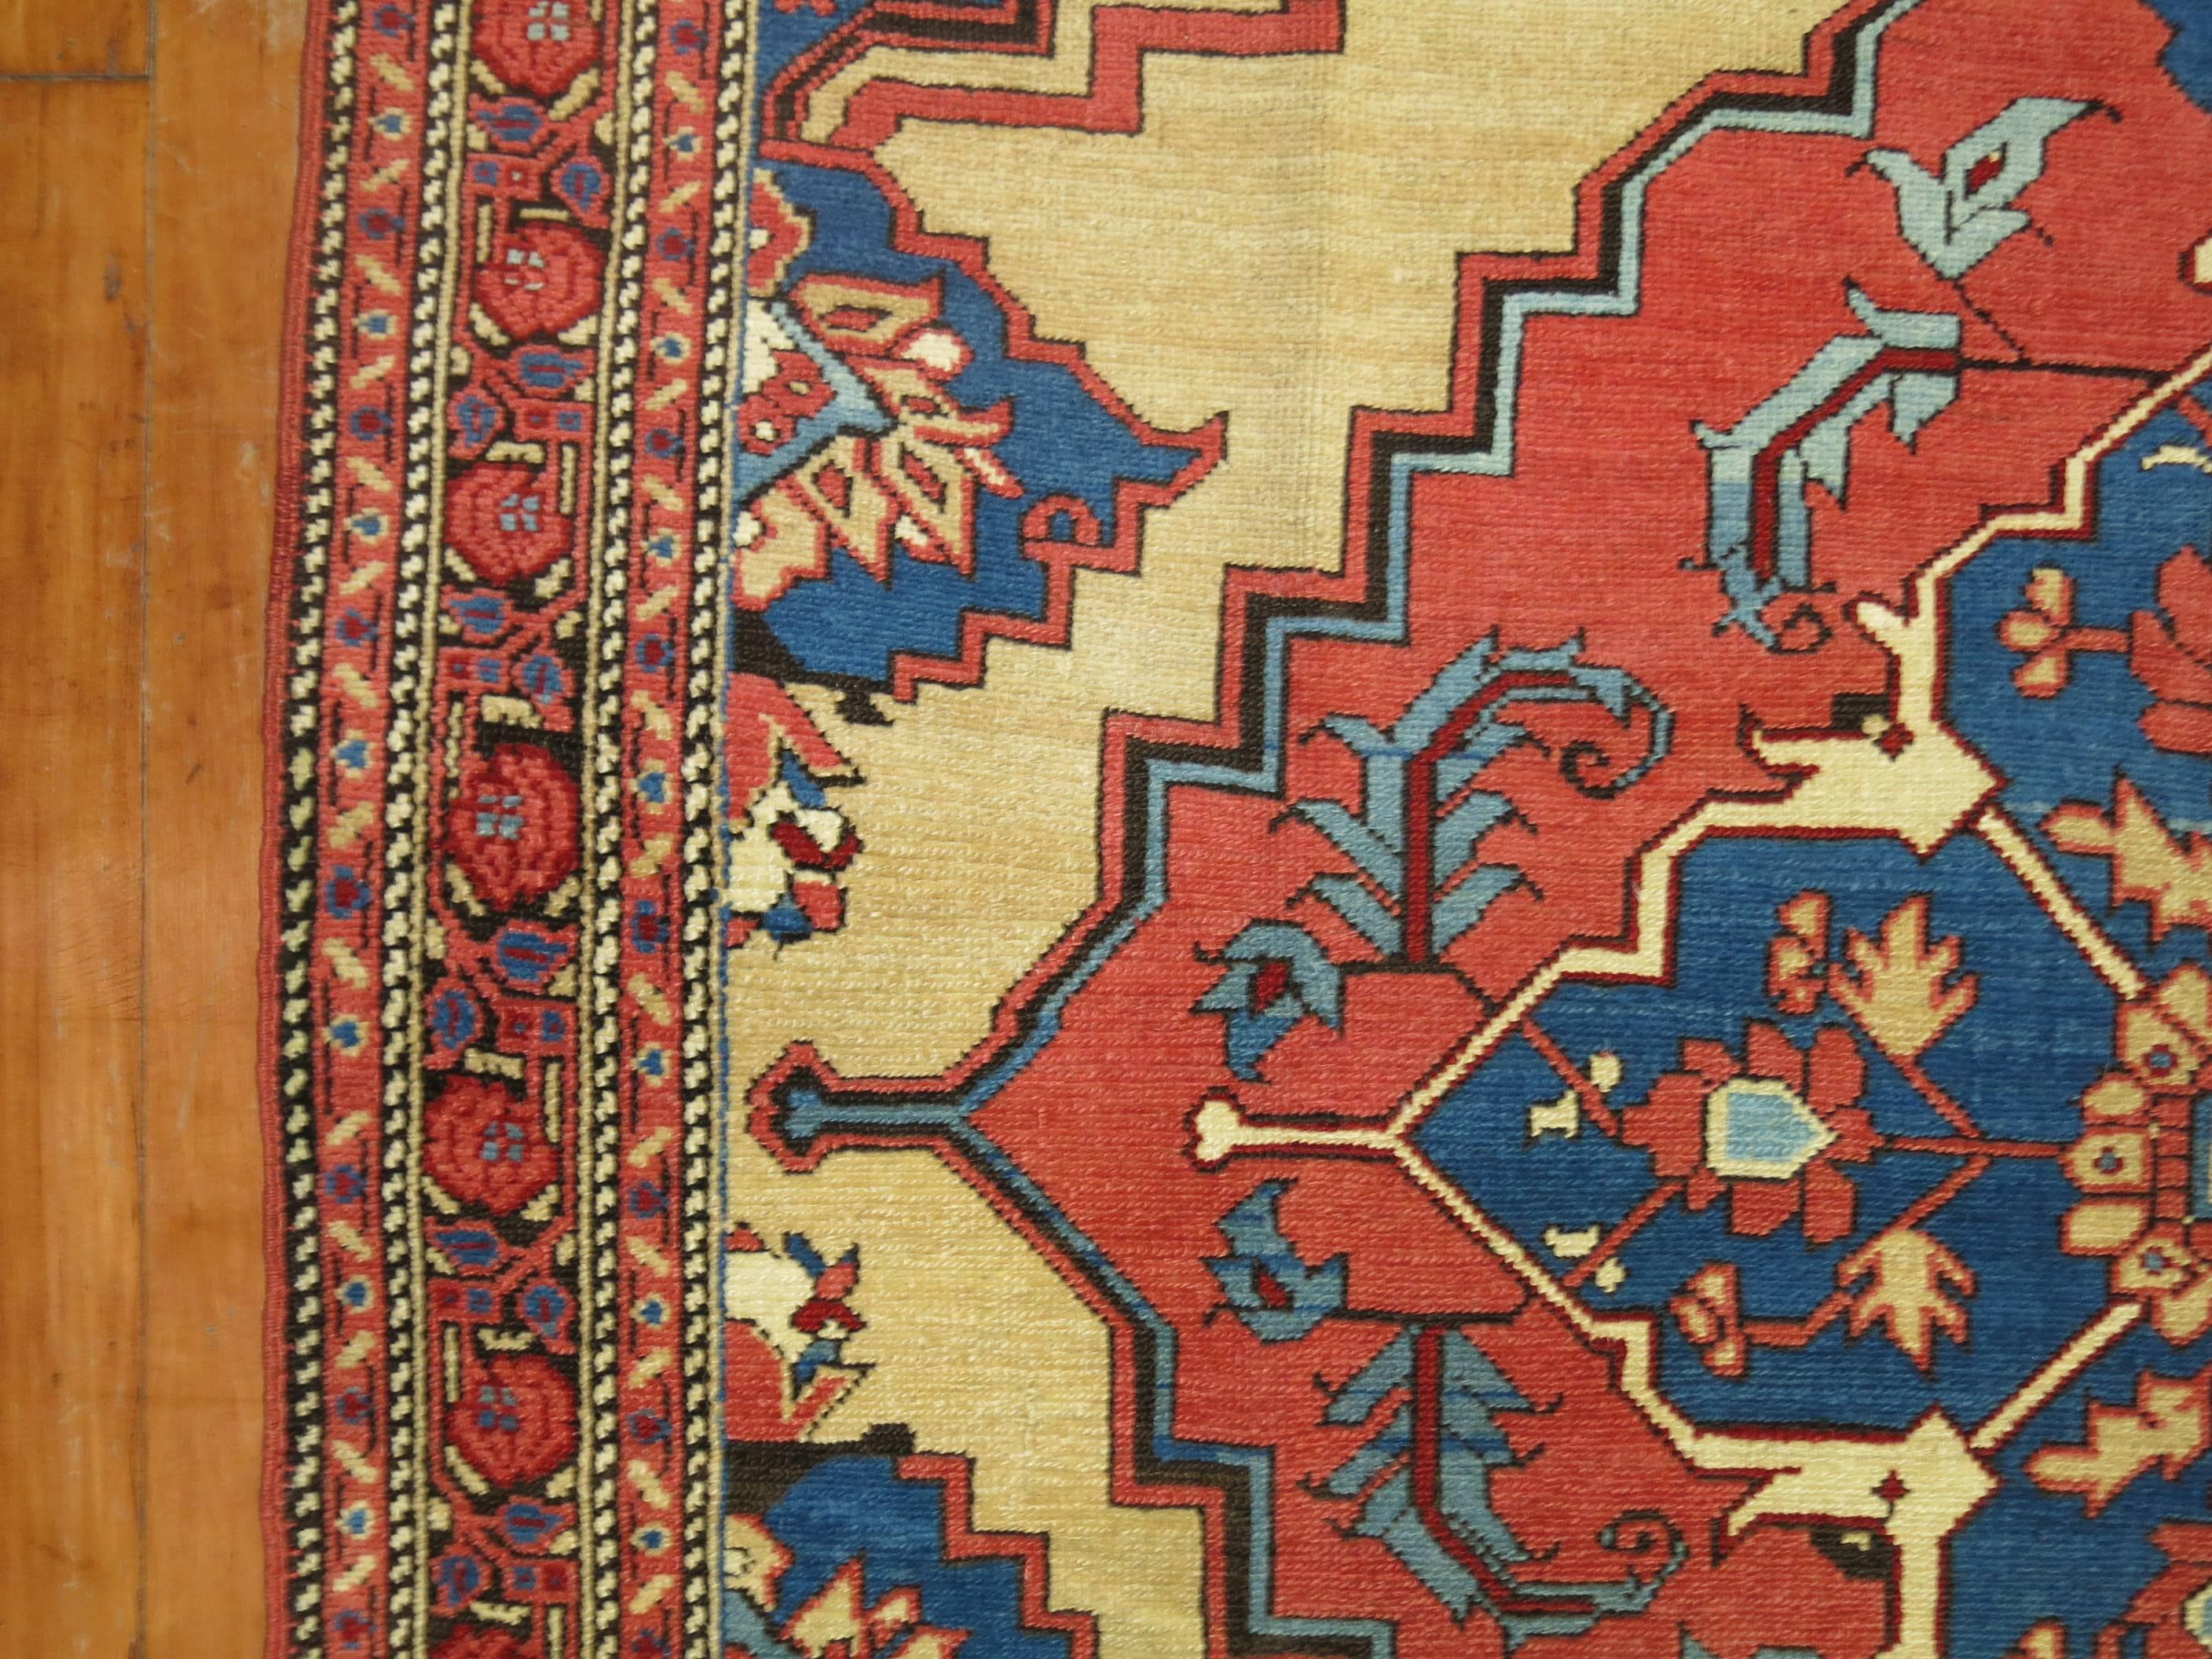 Rare size late 19th century finely woven Persian Bakshaish rug in predominant shades in camel and blue. Piece would make for a great wall piece too

4'6'' x 6'

20th century examples of Bakshaish weavings are very artistically distinguished and have